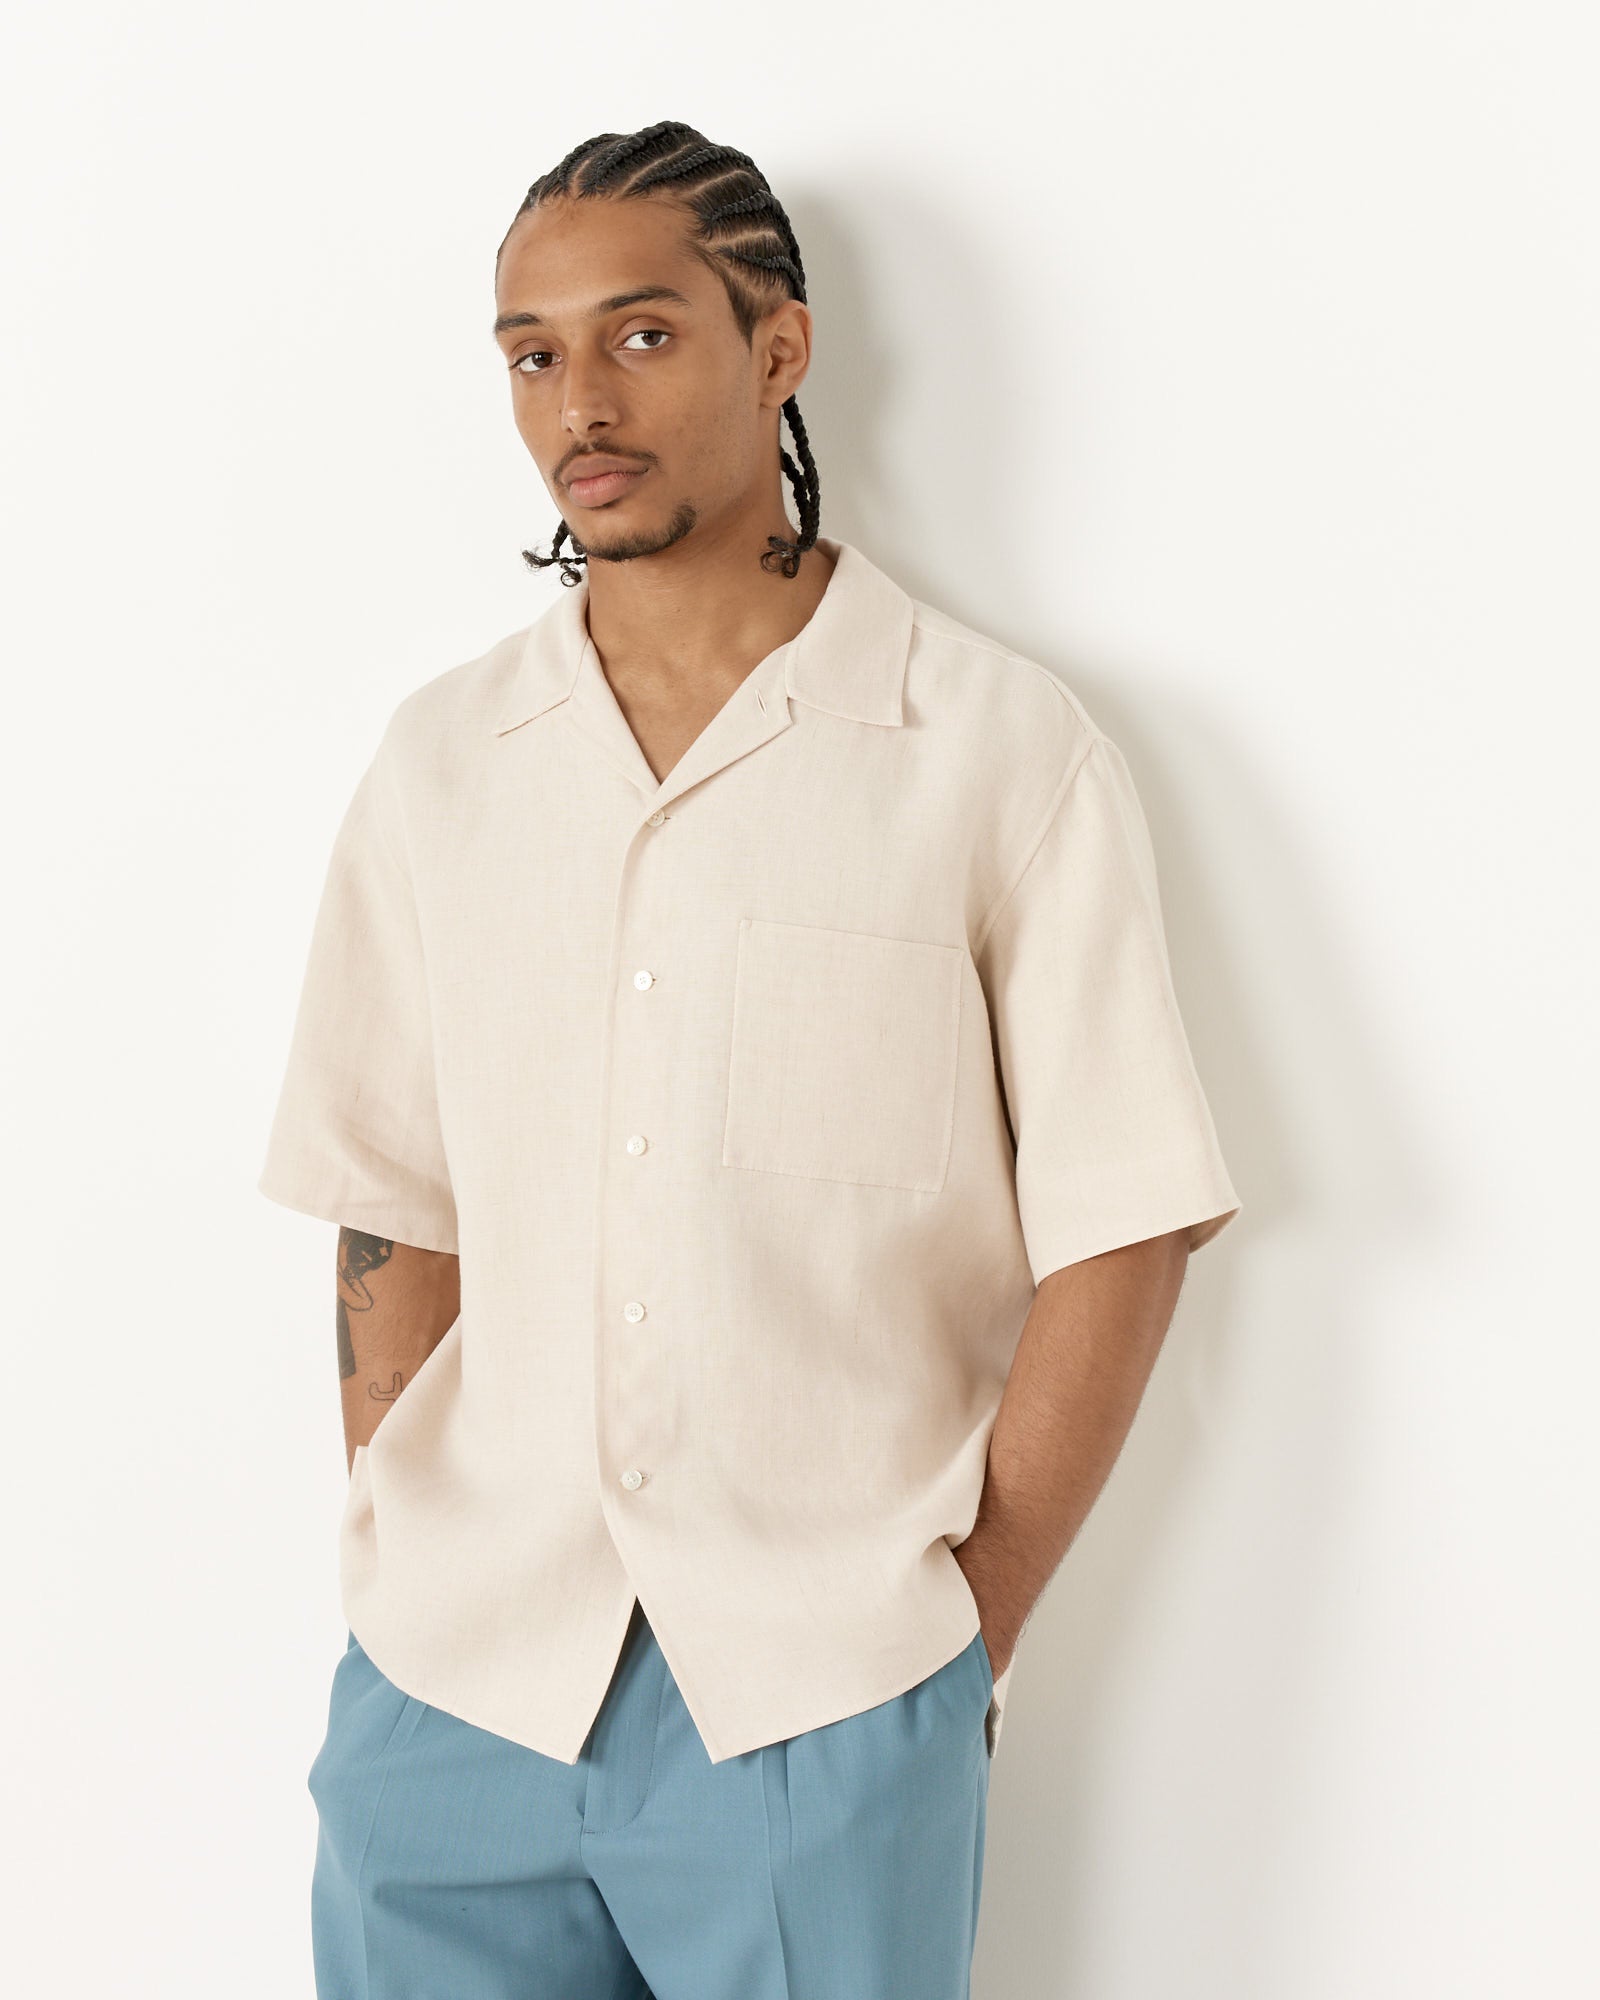 Hand Sewn Shirt in Ivory